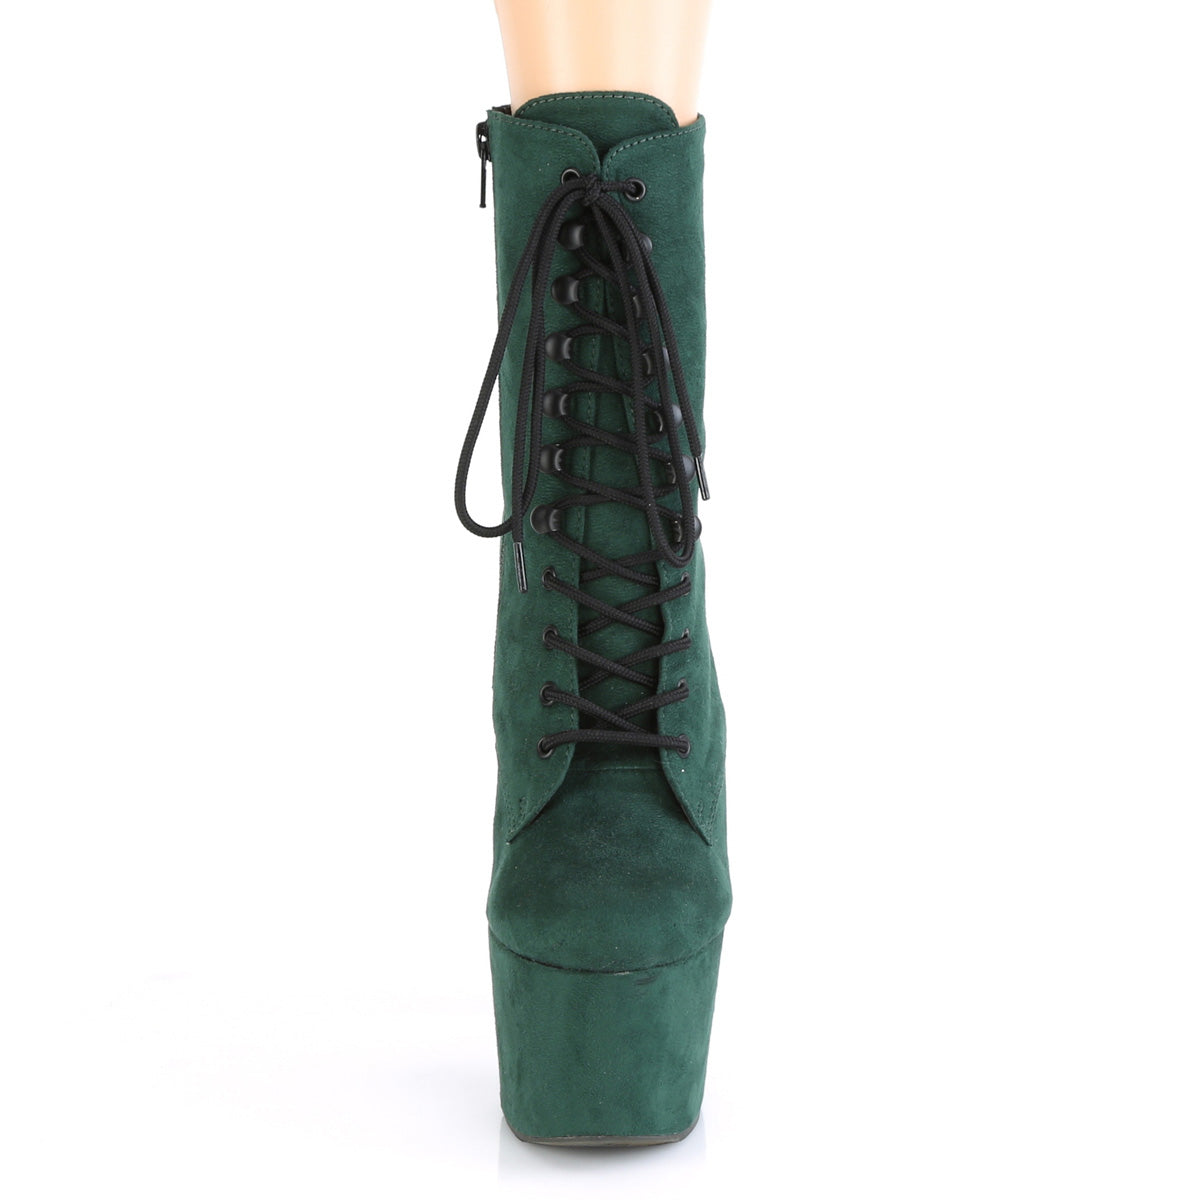 ADORE-1020FS 7" Heel Emerald Green Exotic Dancing Ankle Boot-Pleaser- Sexy Shoes Alternative Footwear